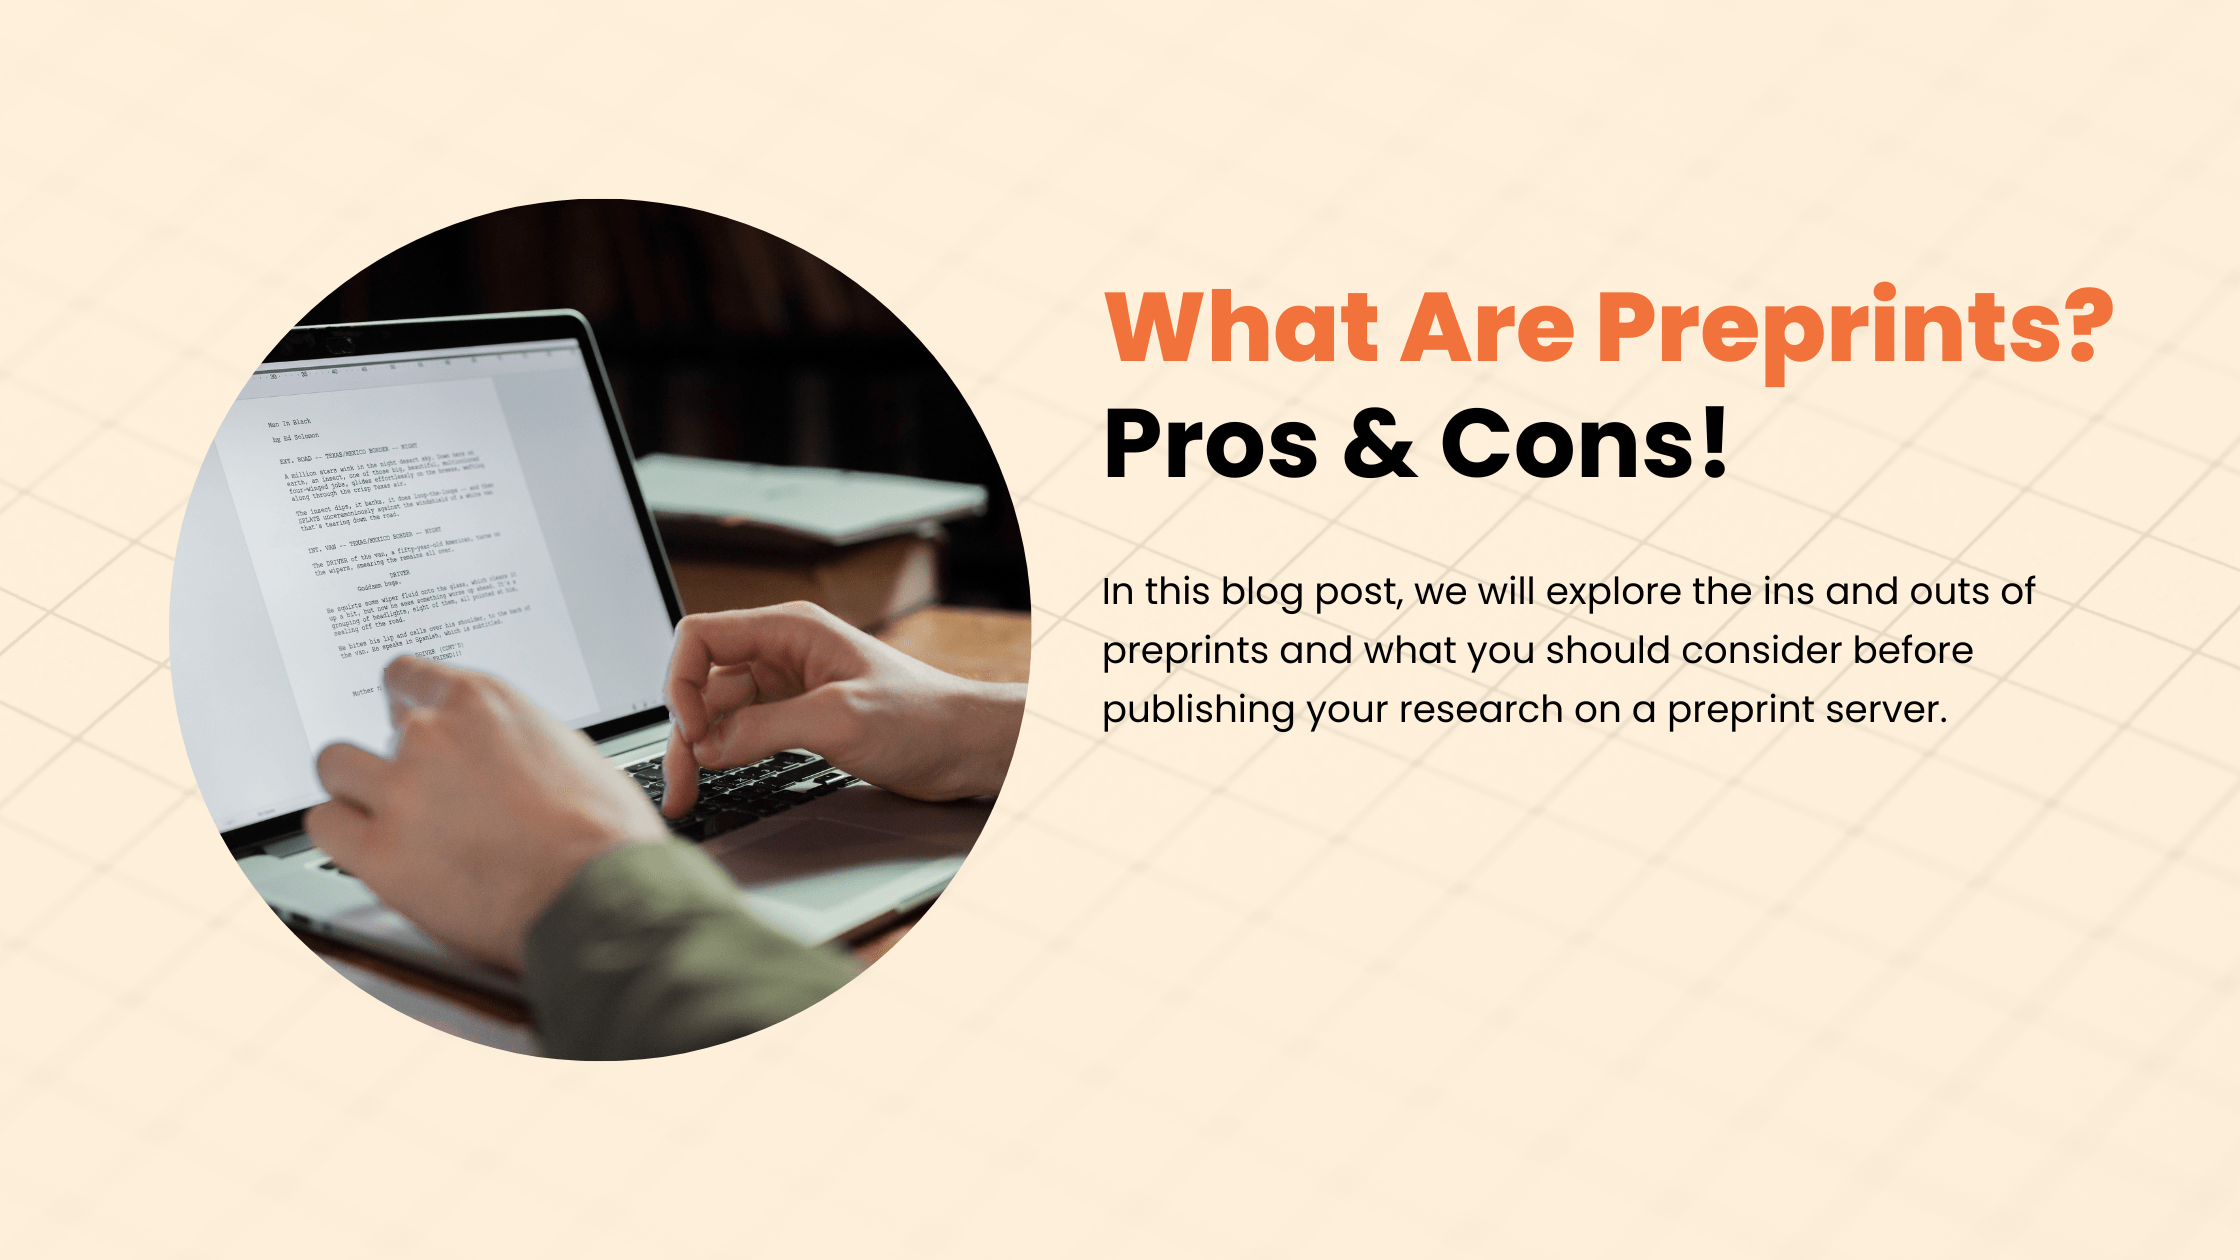 What Are Preprints? What Are the Pros and Cons of Publishing Preprints?